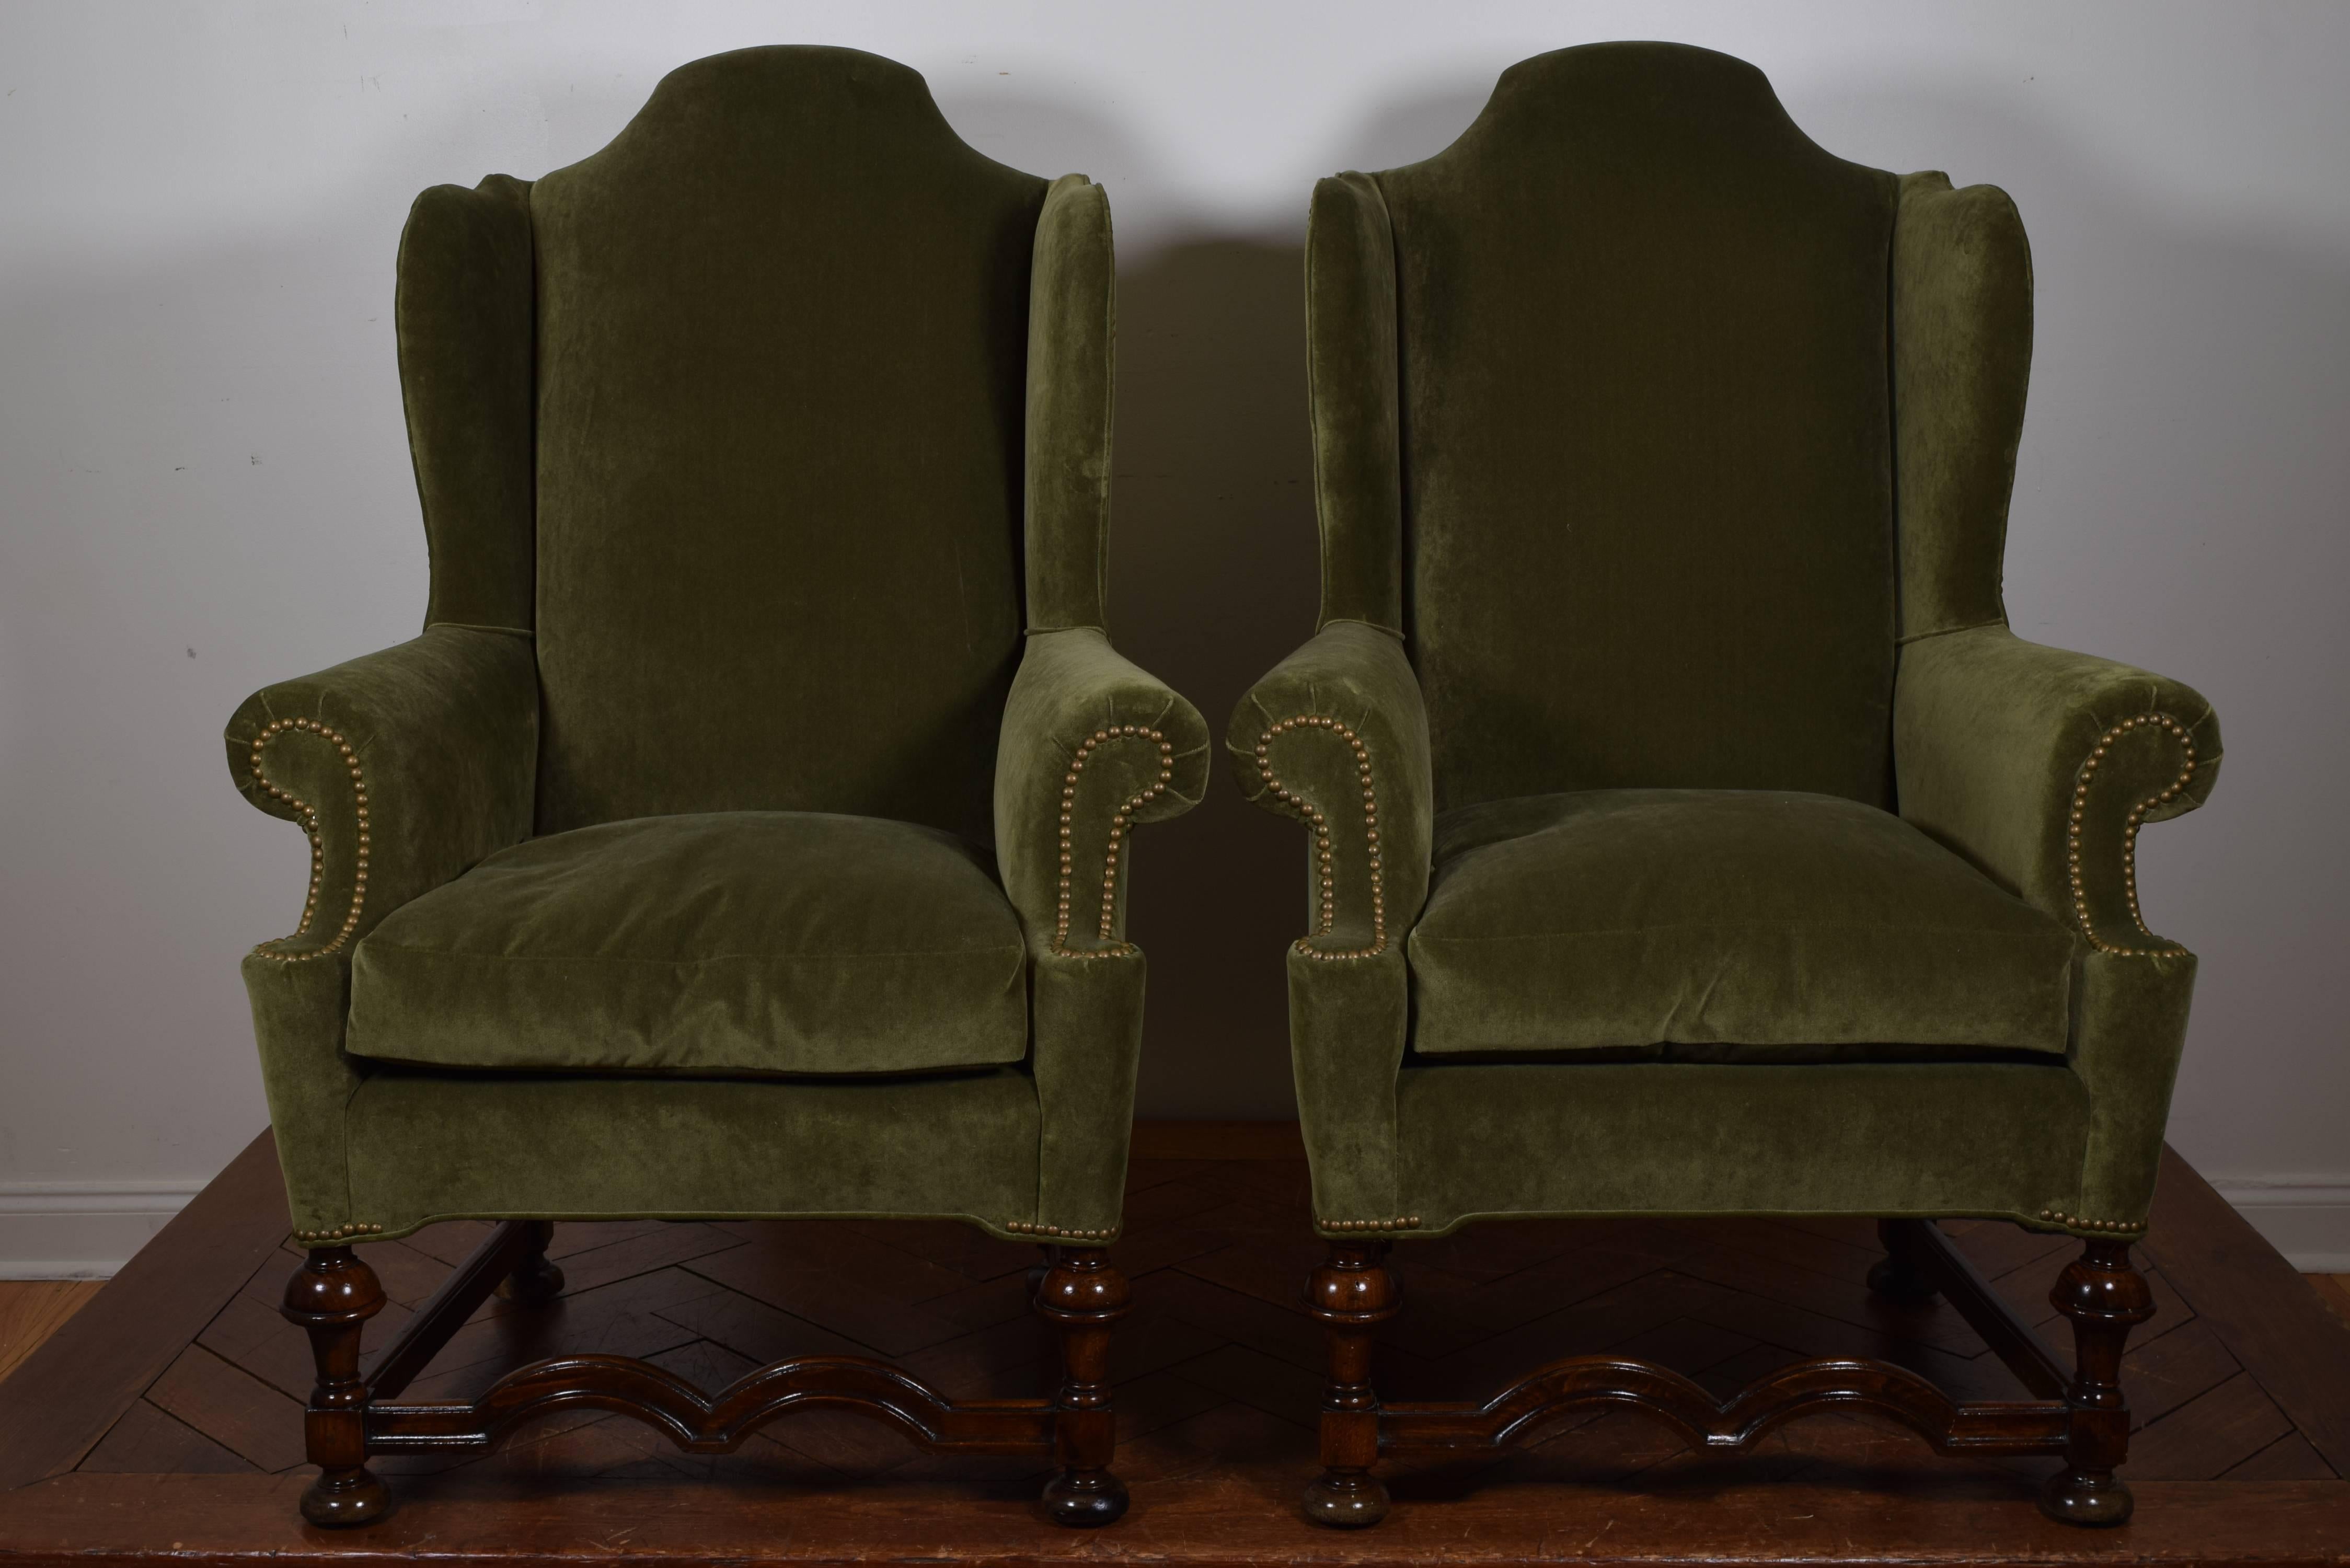 The arched backrests behind fully upholstered wings and rolled arms, the upholstery trimmed in brass nailheads, down seat cushions, the frames nicely carved with turned legs and channeled stretchers, raised on bun feet.